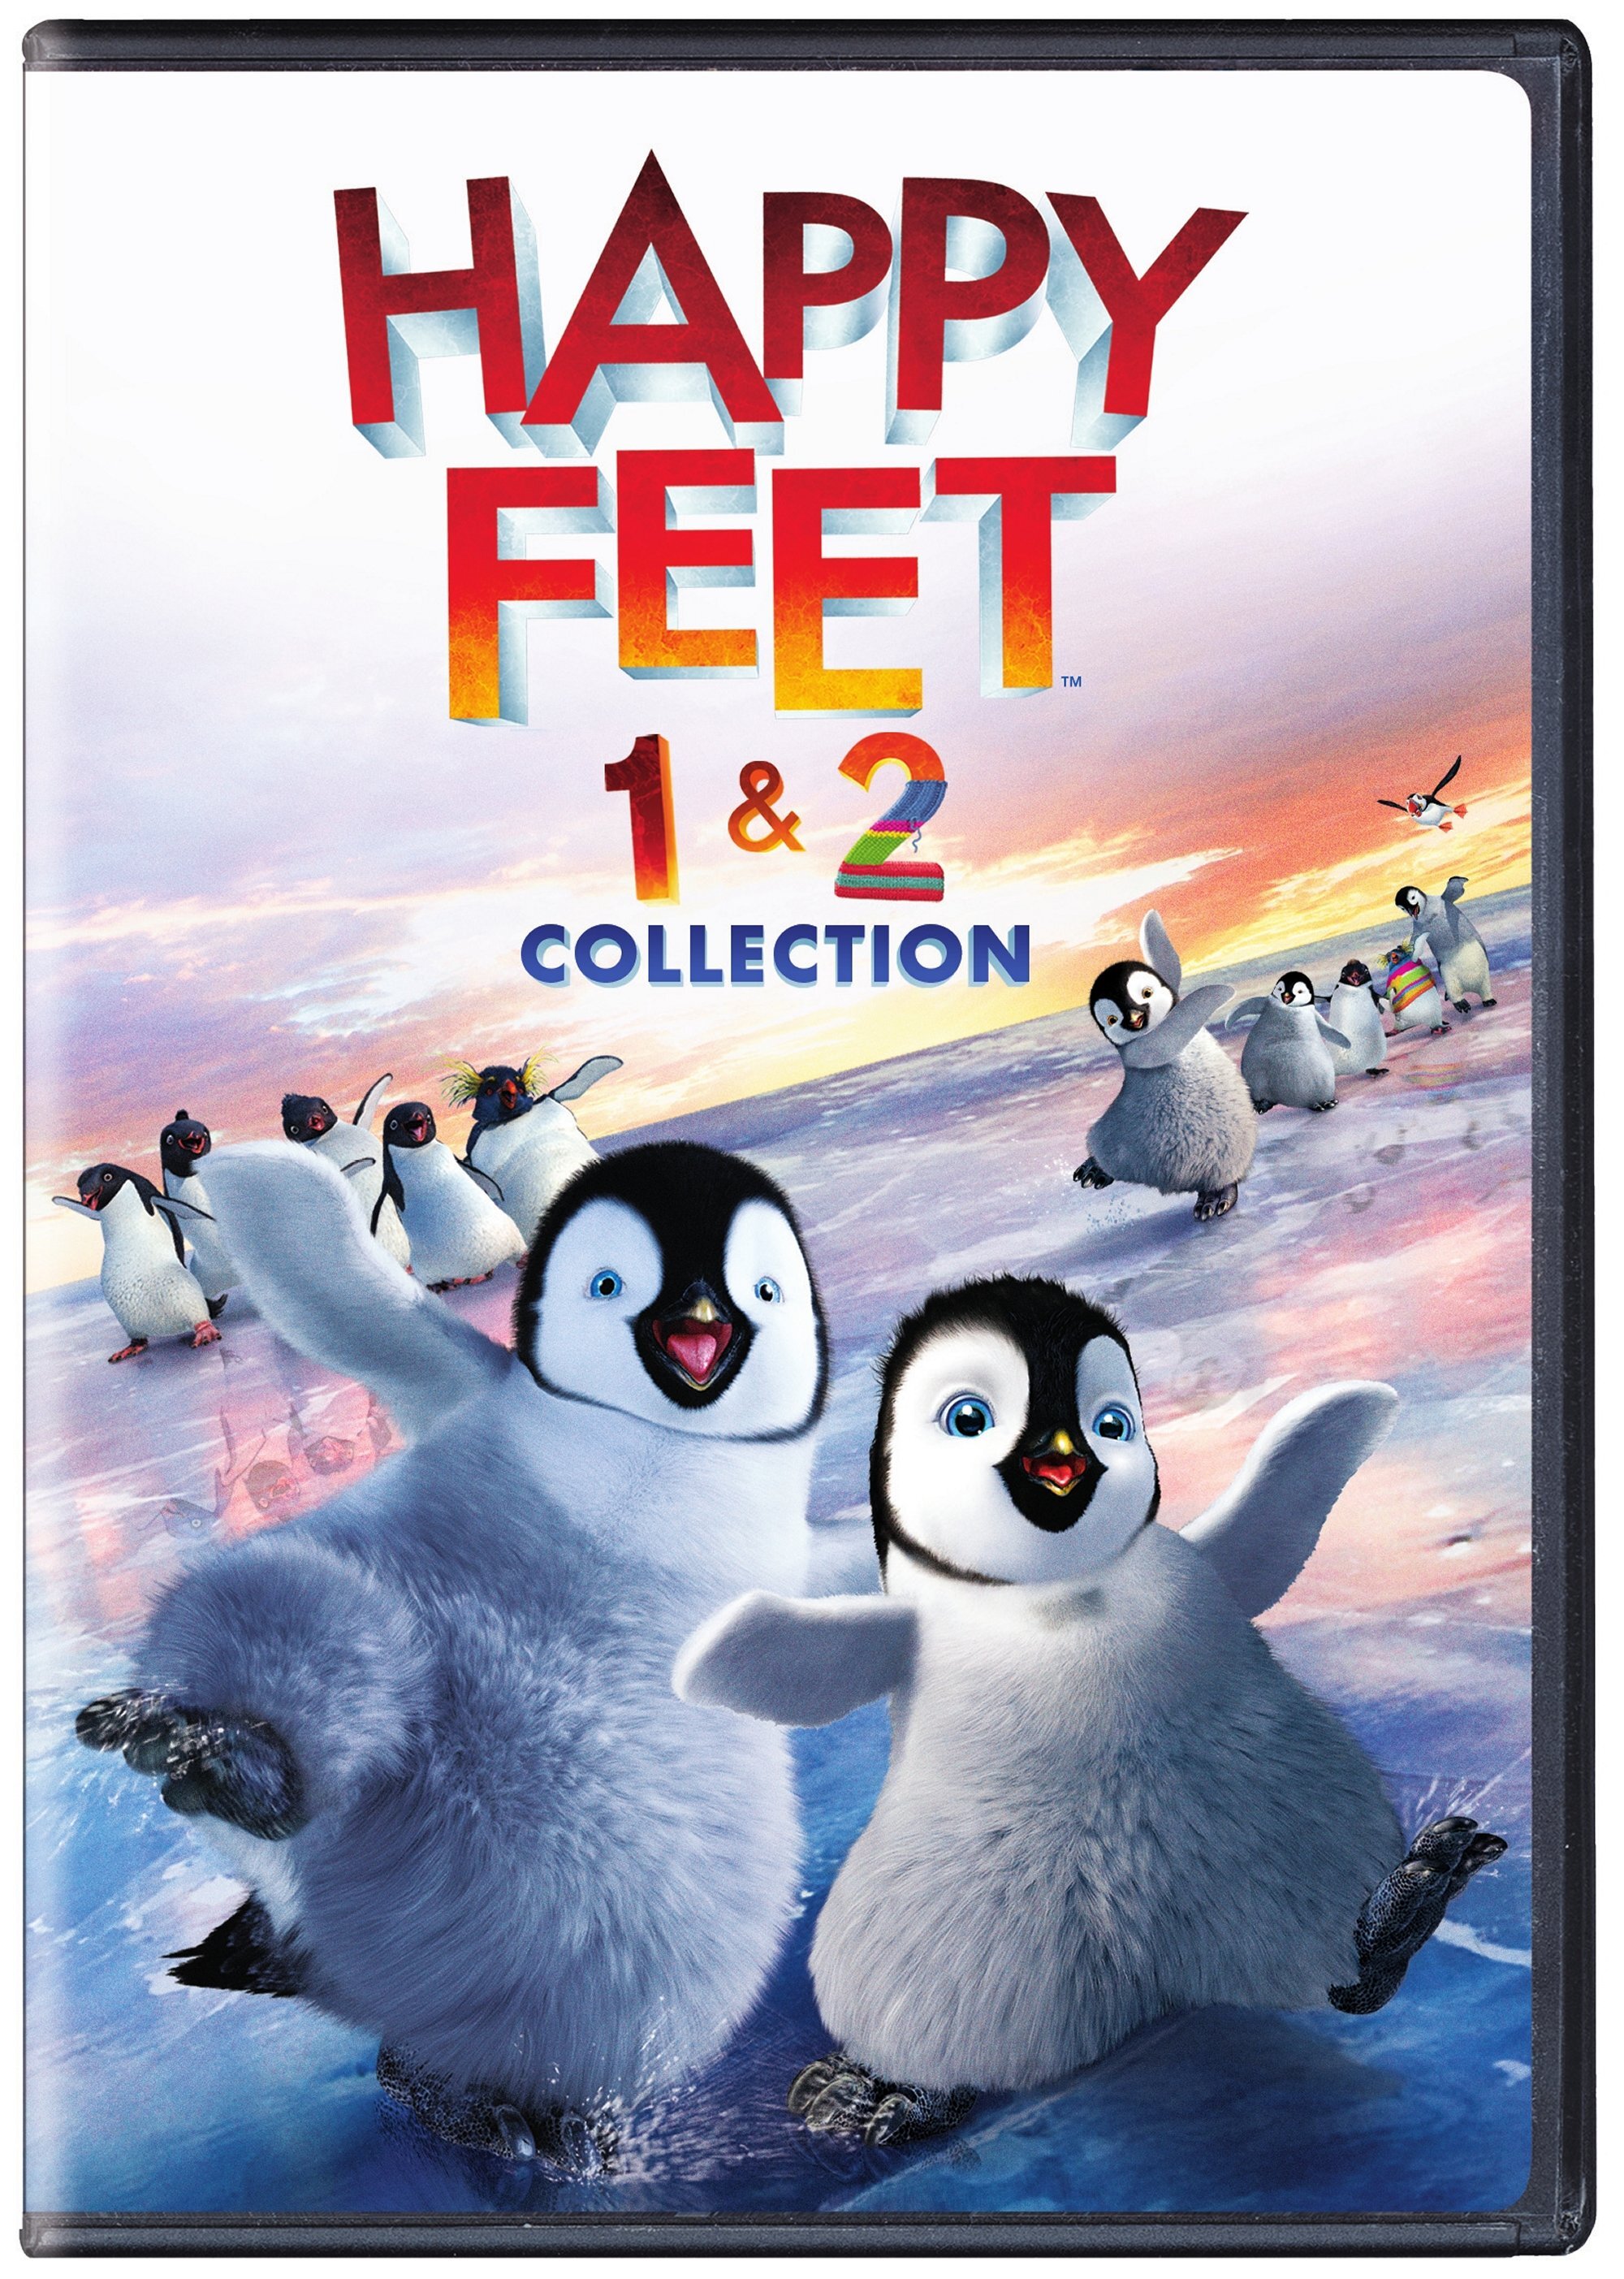 Happy Feet 1 & 2 (DVD Double Feature) - DVD [ 2011 ]  - Children Movies On DVD - Movies On GRUV